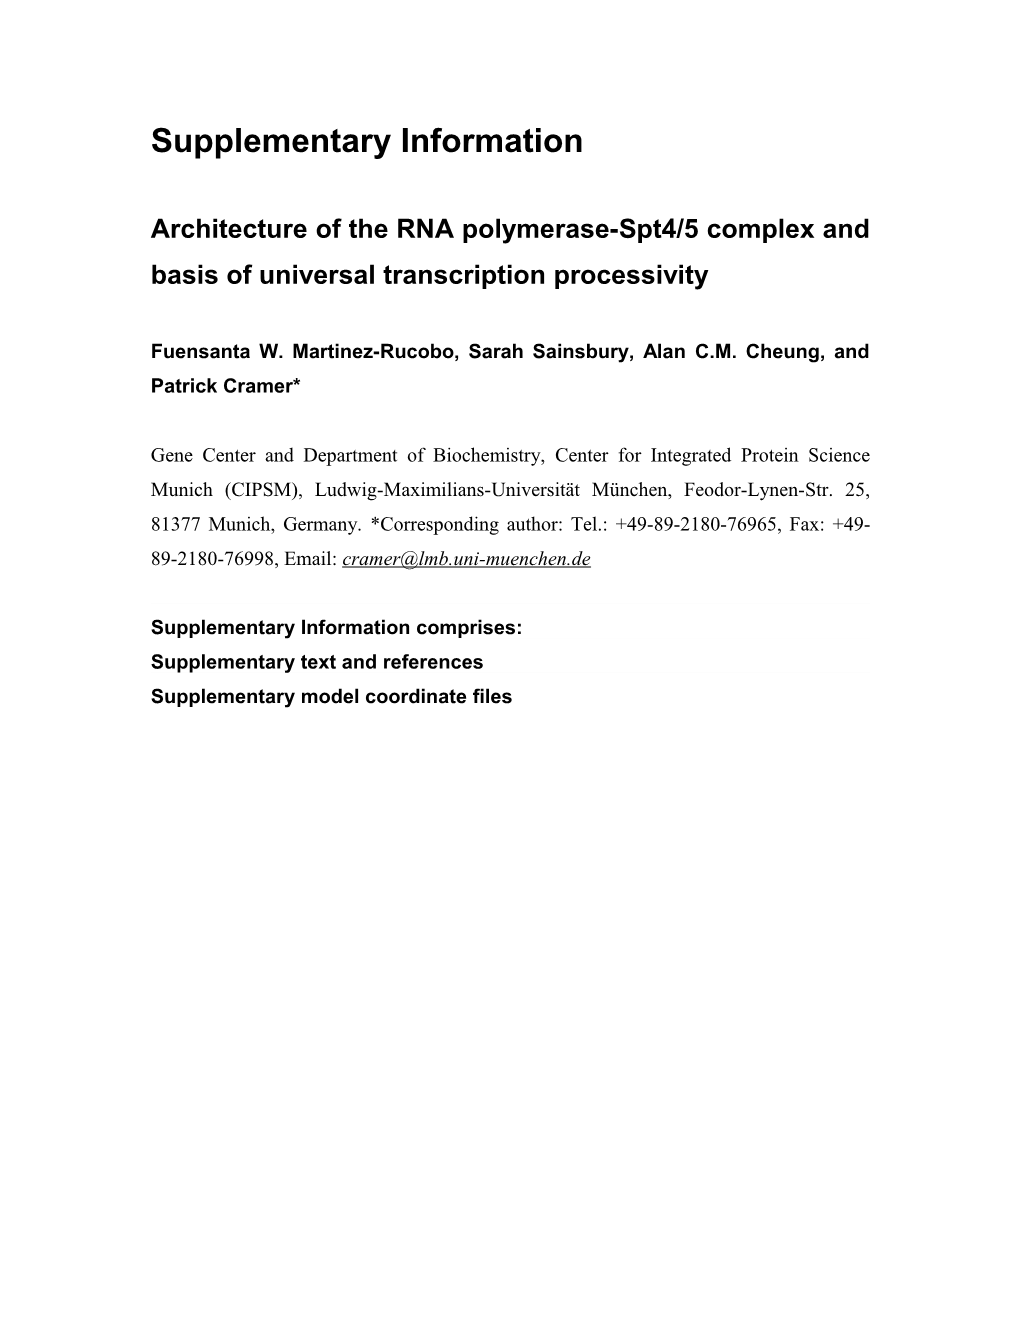 Architecture of the RNA Polymerase-Spt4/5 Complex and Basis of Universal Transcription